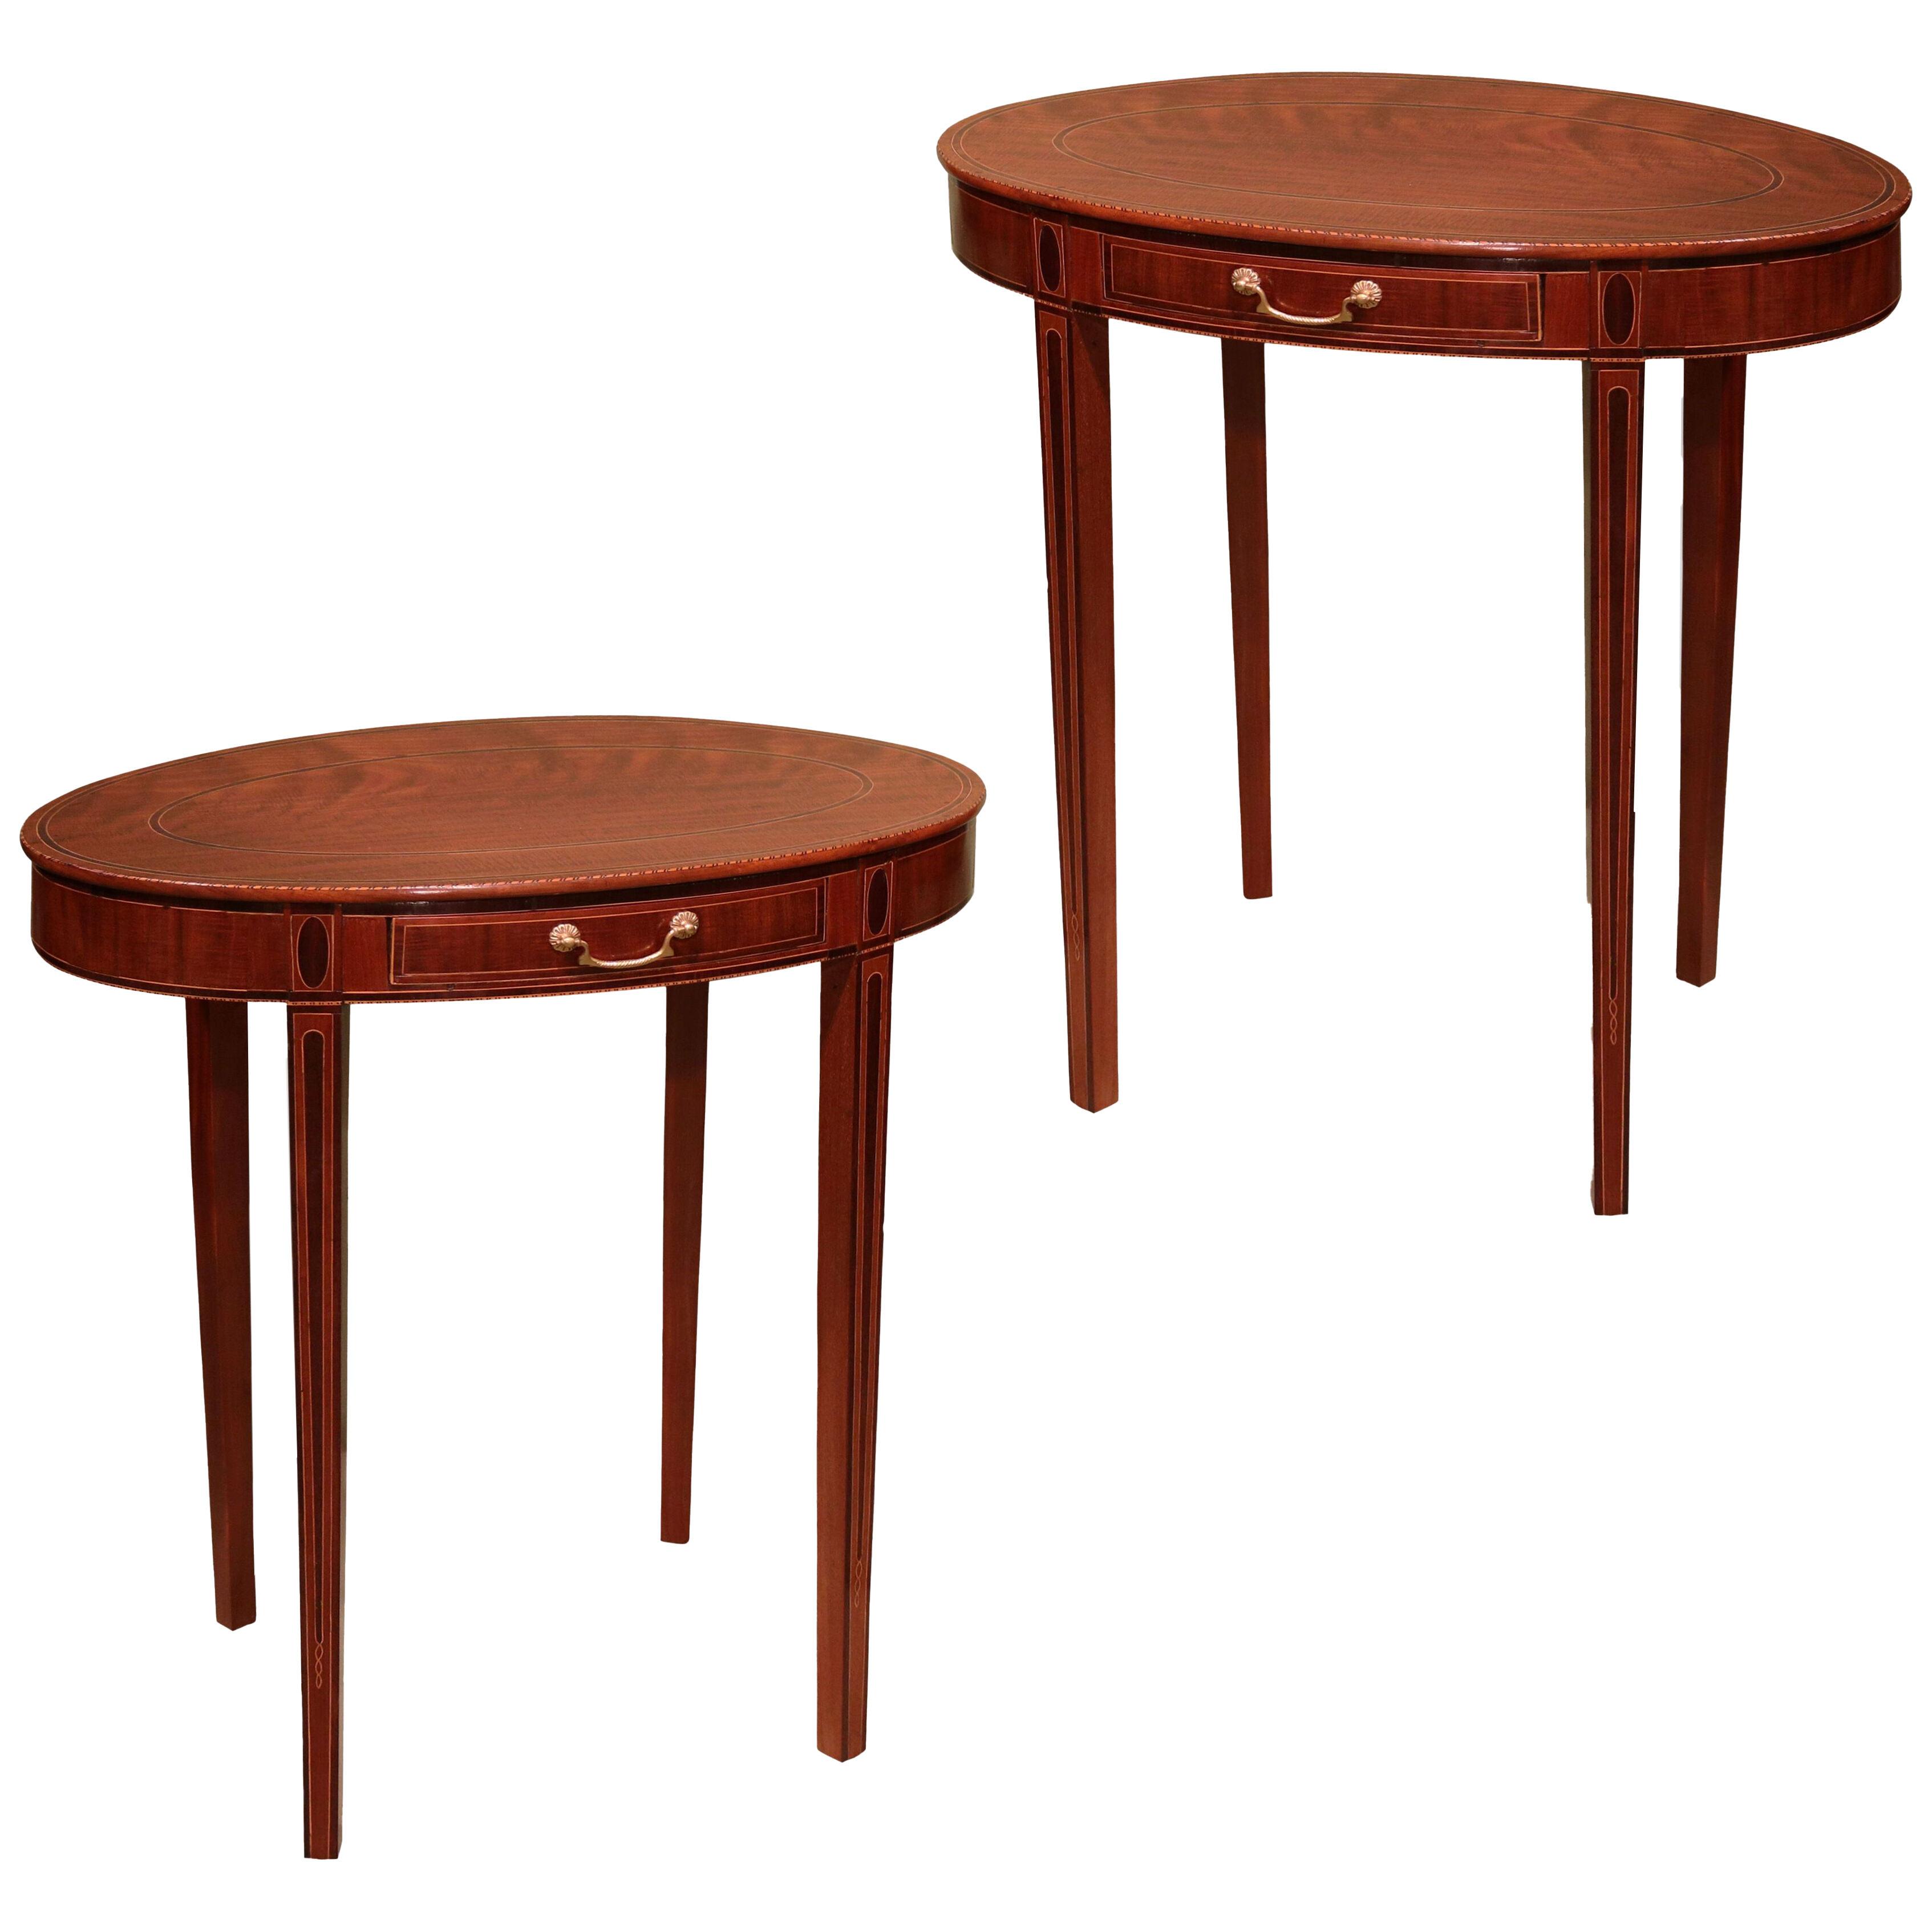 A pair of late 18th century Sheraton period mahogany oval occasional tables